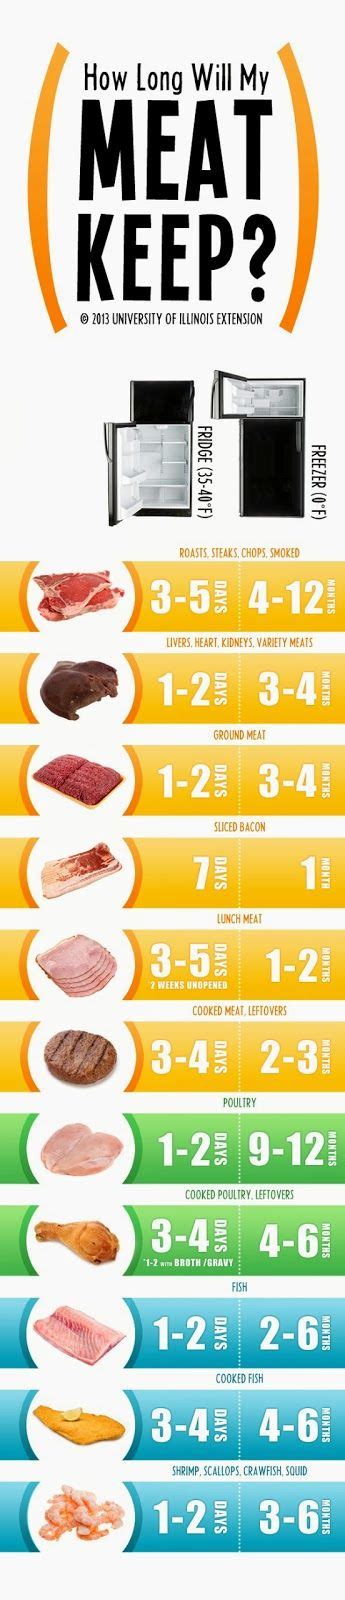 So, what are some foods that will last a long time in the cupboard or refrigerator? How long will meat keep? | Bar & Kitchen | Pinterest ...